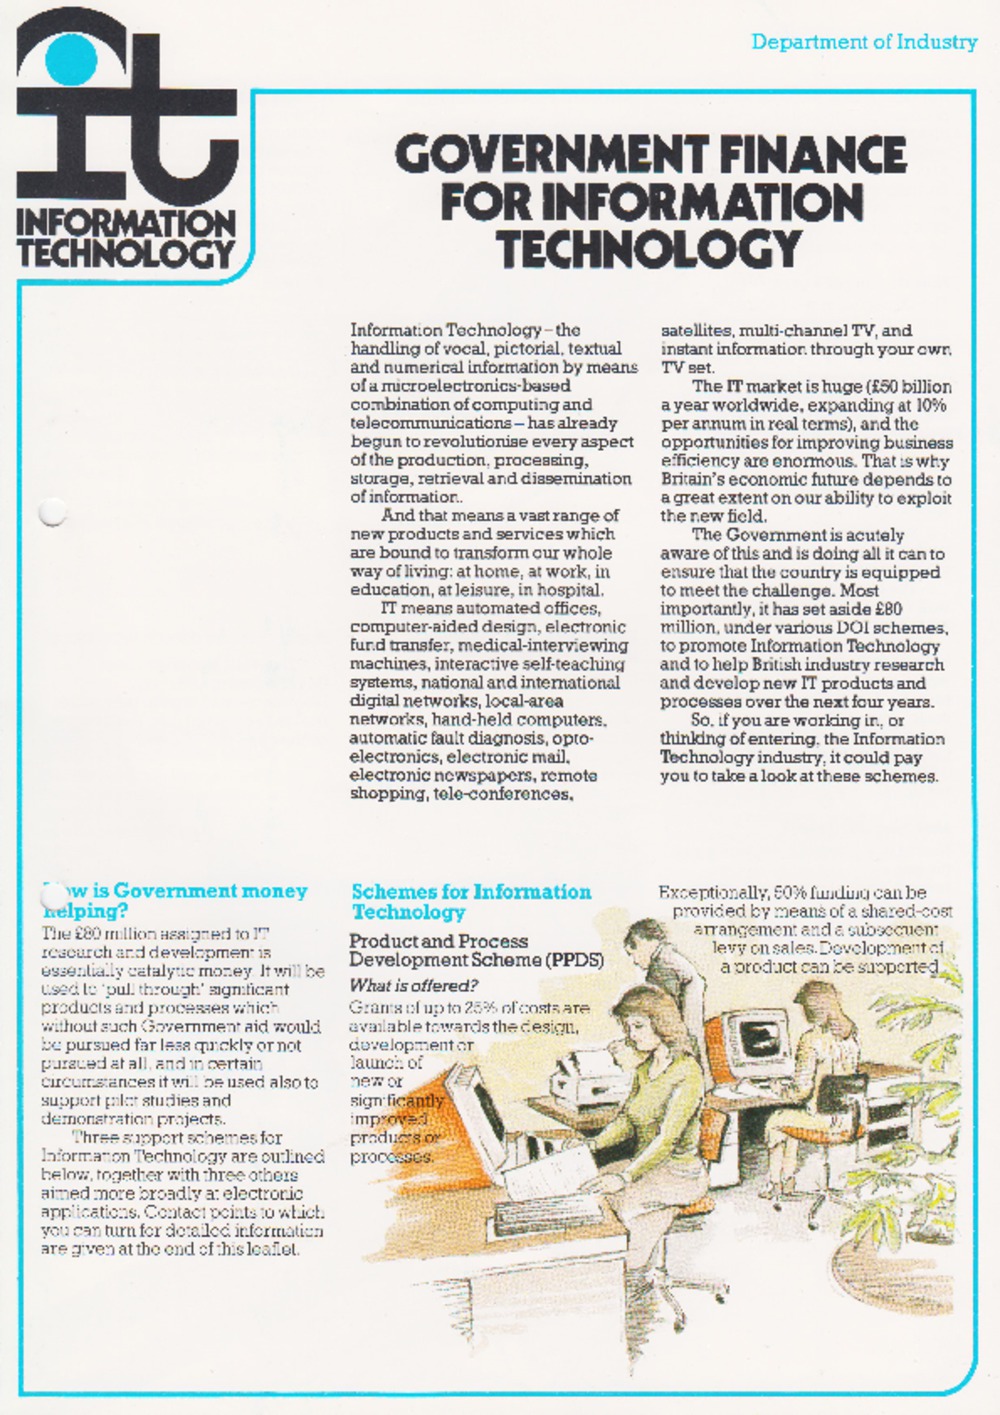 Article: Government Finance for Information Technology